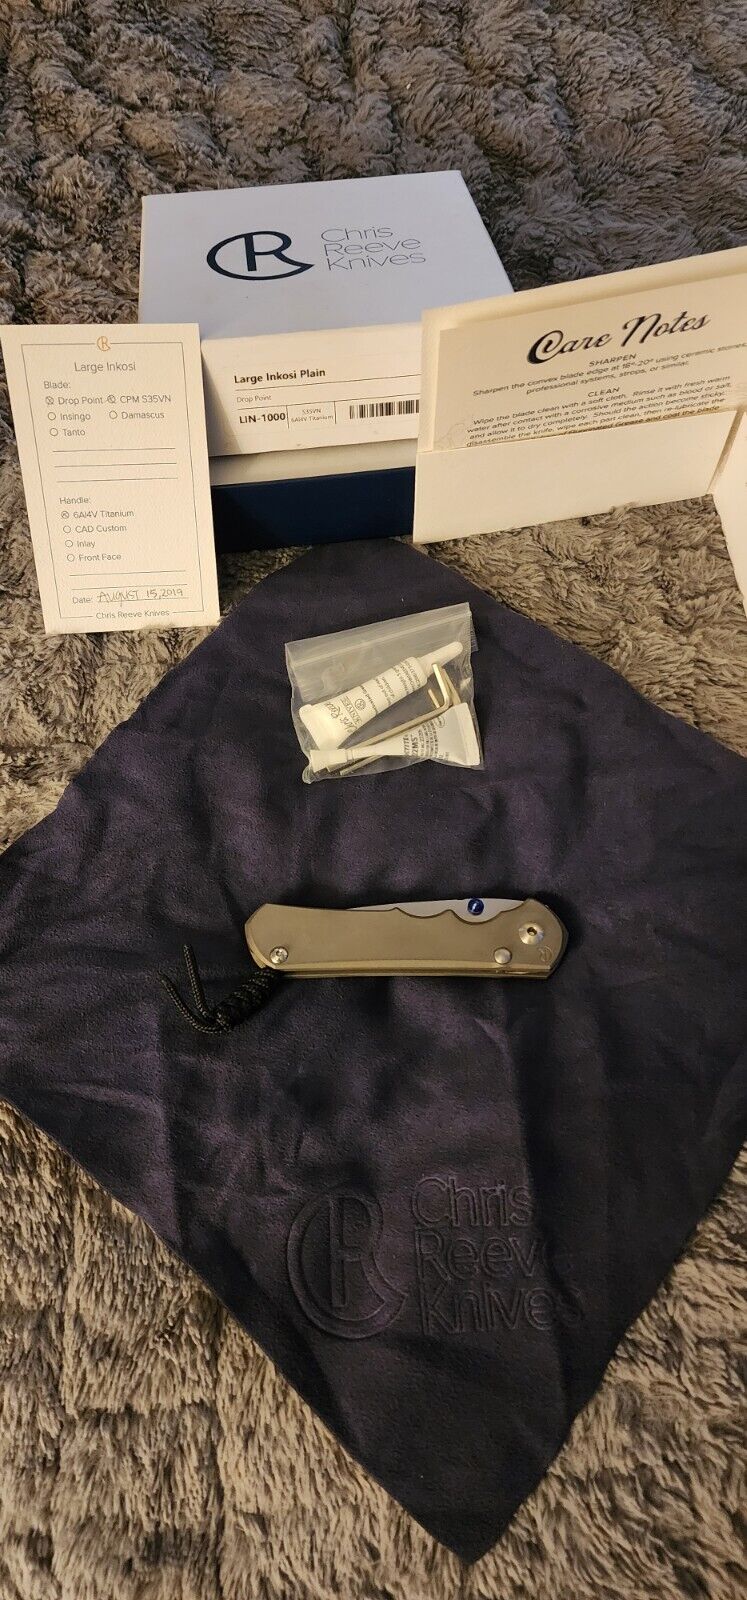 Chris Reeve Large Inkosi (Chief) LIN-1000 tactical folding knife. New. 8/15/2019